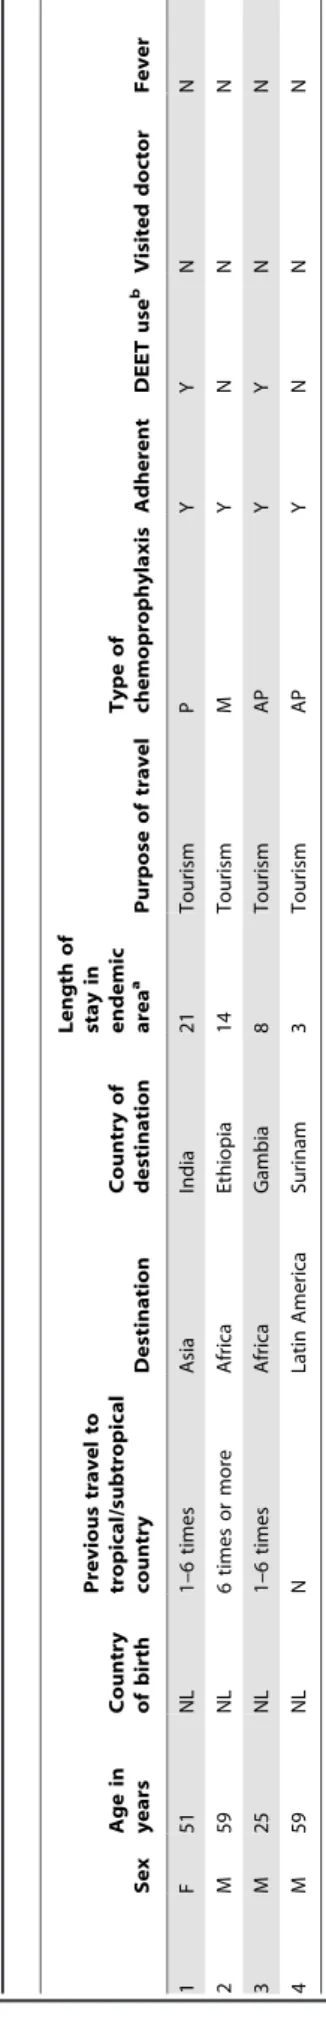 Table 3 shows the adherence to mefloquine, atovaquone- atovaquone-proguanil and atovaquone-proguanil prior to, during, and after stay in endemic area(s) among travelers who started with prophylaxis